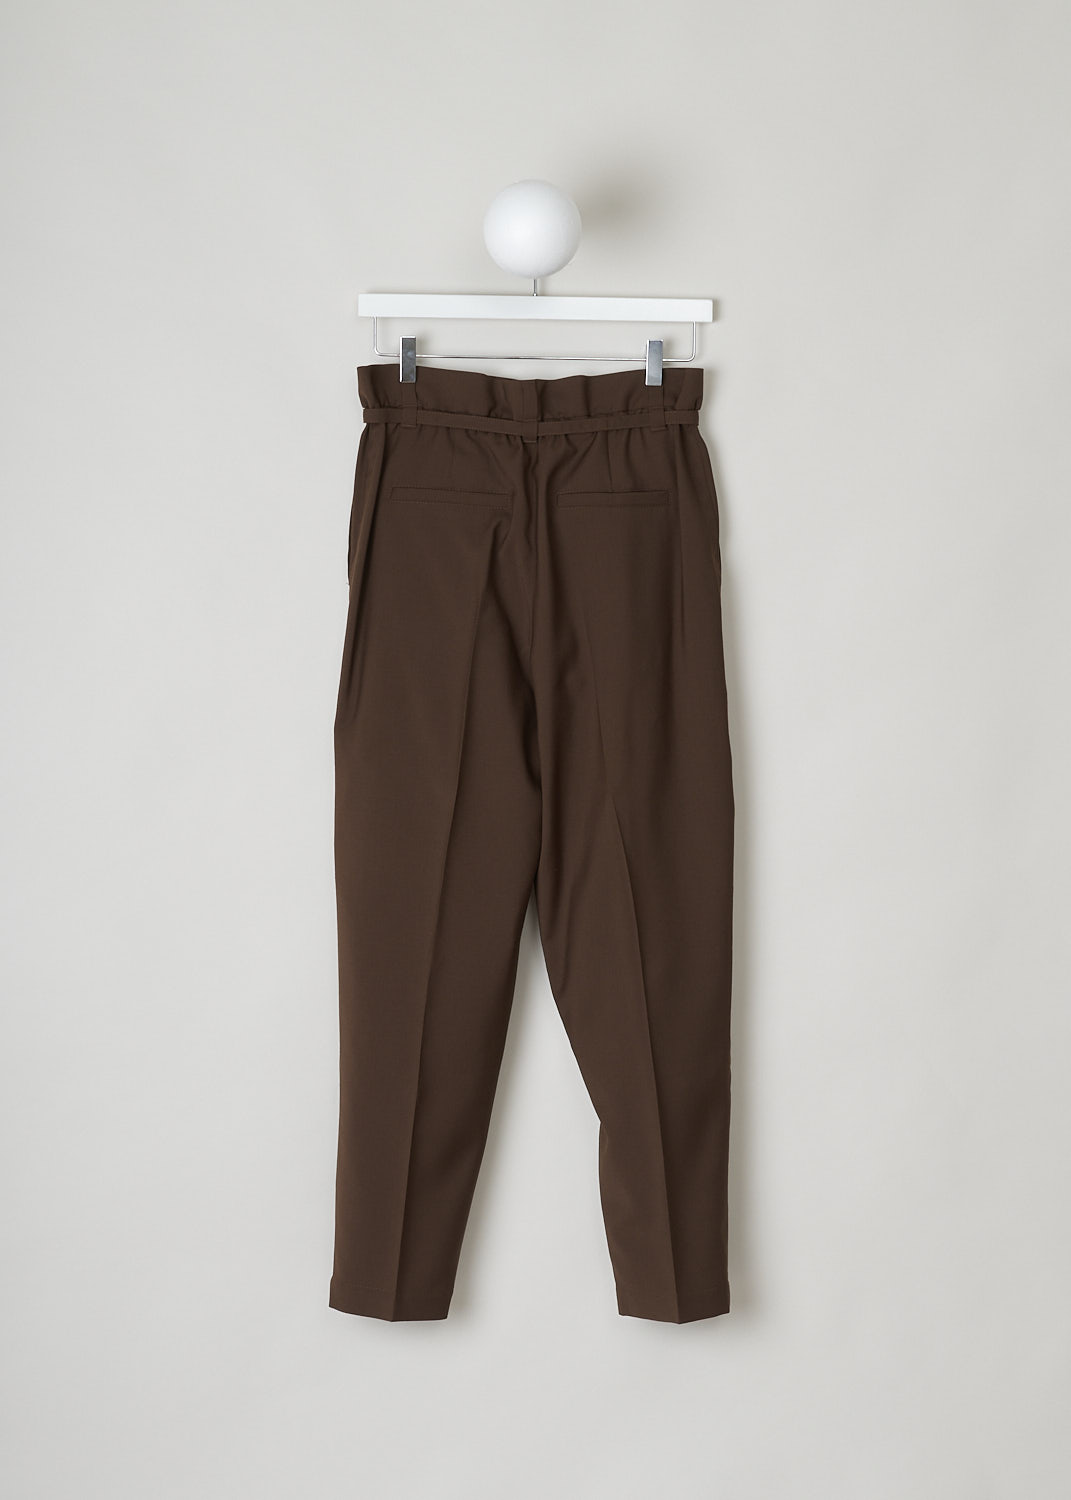 BRUNELLO CUCINELLI, BROWN PAPERBAG PANTS, MA185P7461_C8517, Brown, Back, These brown pants have a paperbag waist which is half elasticated. These pants come with both a broad and a narrow belt loop. A narrow fabric belt with monili beading is included. A concealed snap button and zipper function as the closure option. These pants have tapered pant legs with centre creases. Slanted pockets can be found in the front and welt pockets in the back.
